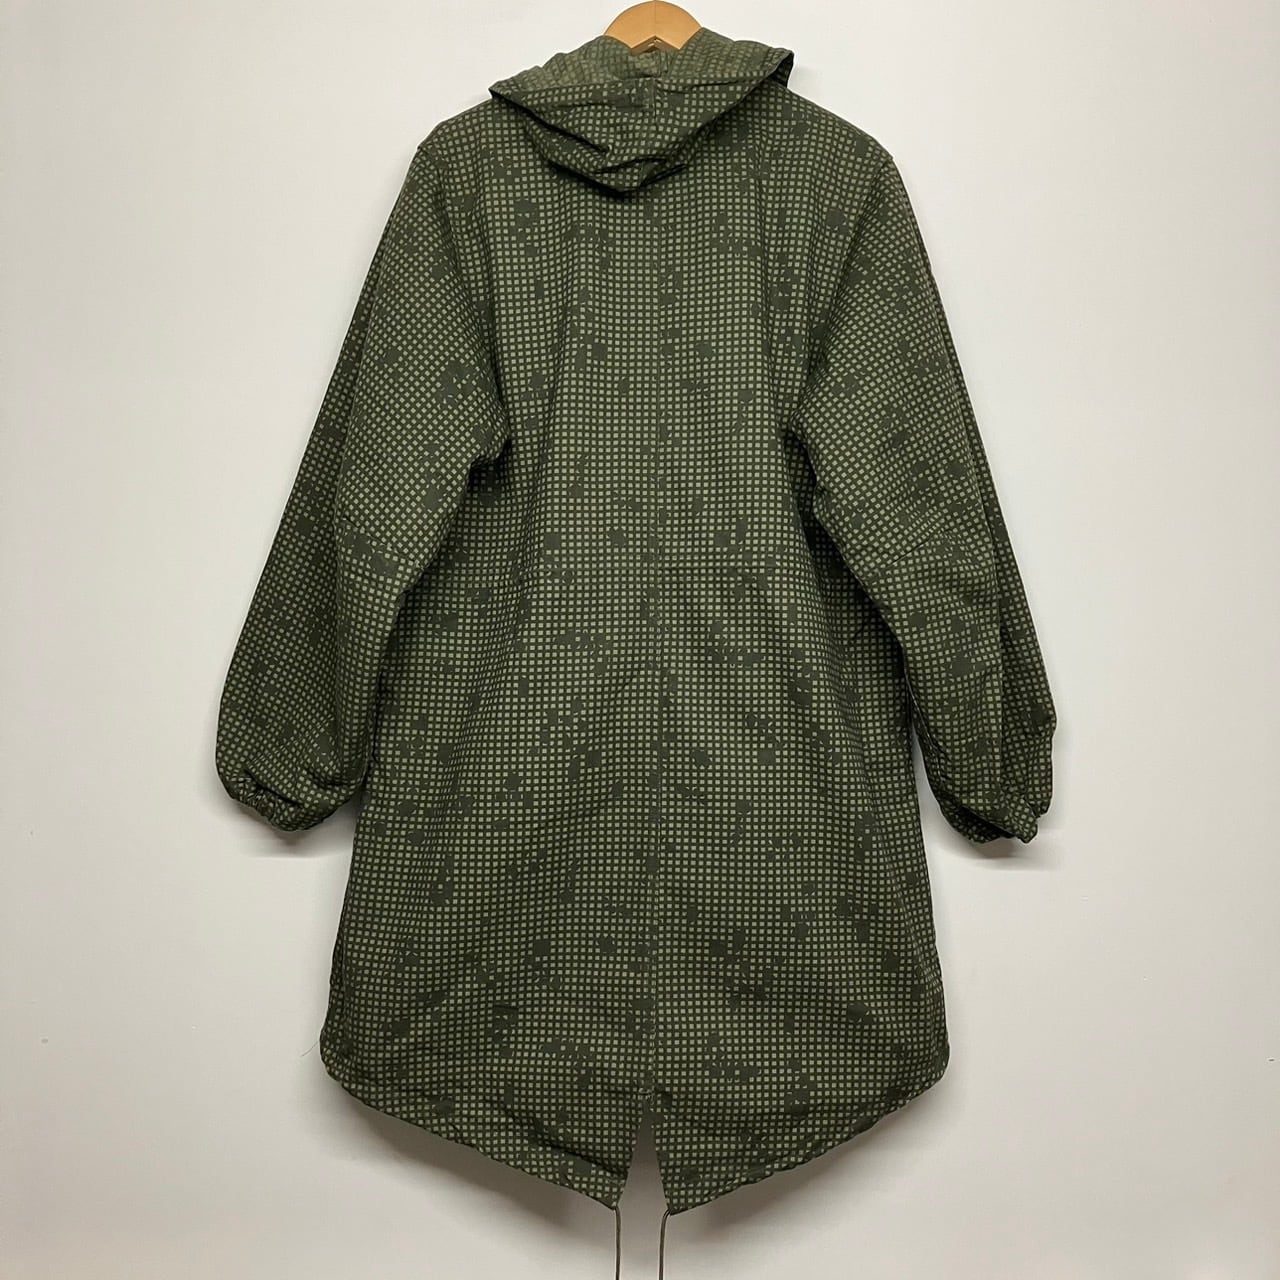 80’s U.S.ARMY NIGHT CAMOUFLAGE PARKA with LINER FISHTAIL ナイトカモ モッズコート  フィールドコート 迷彩 ライナー付き